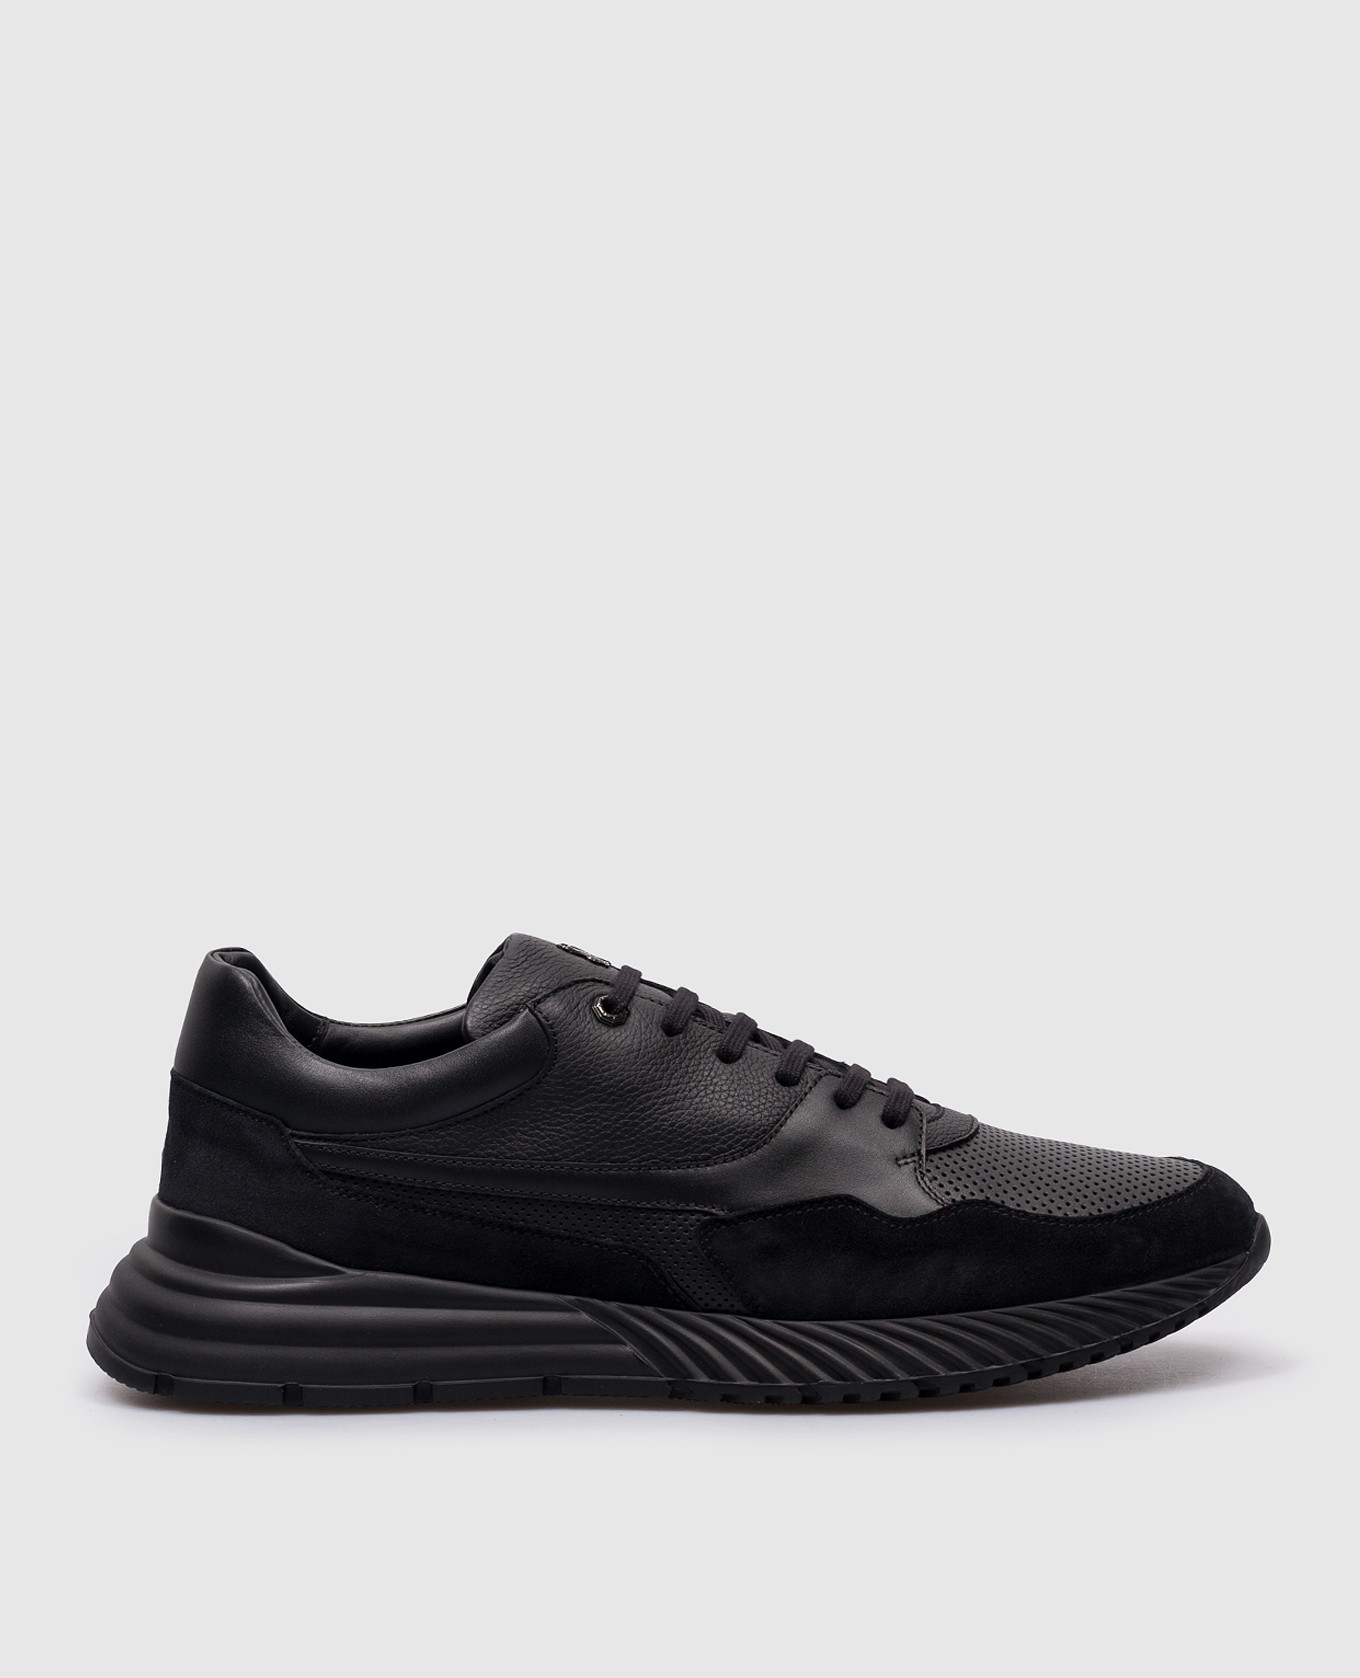 Black leather sneakers with logo monogram